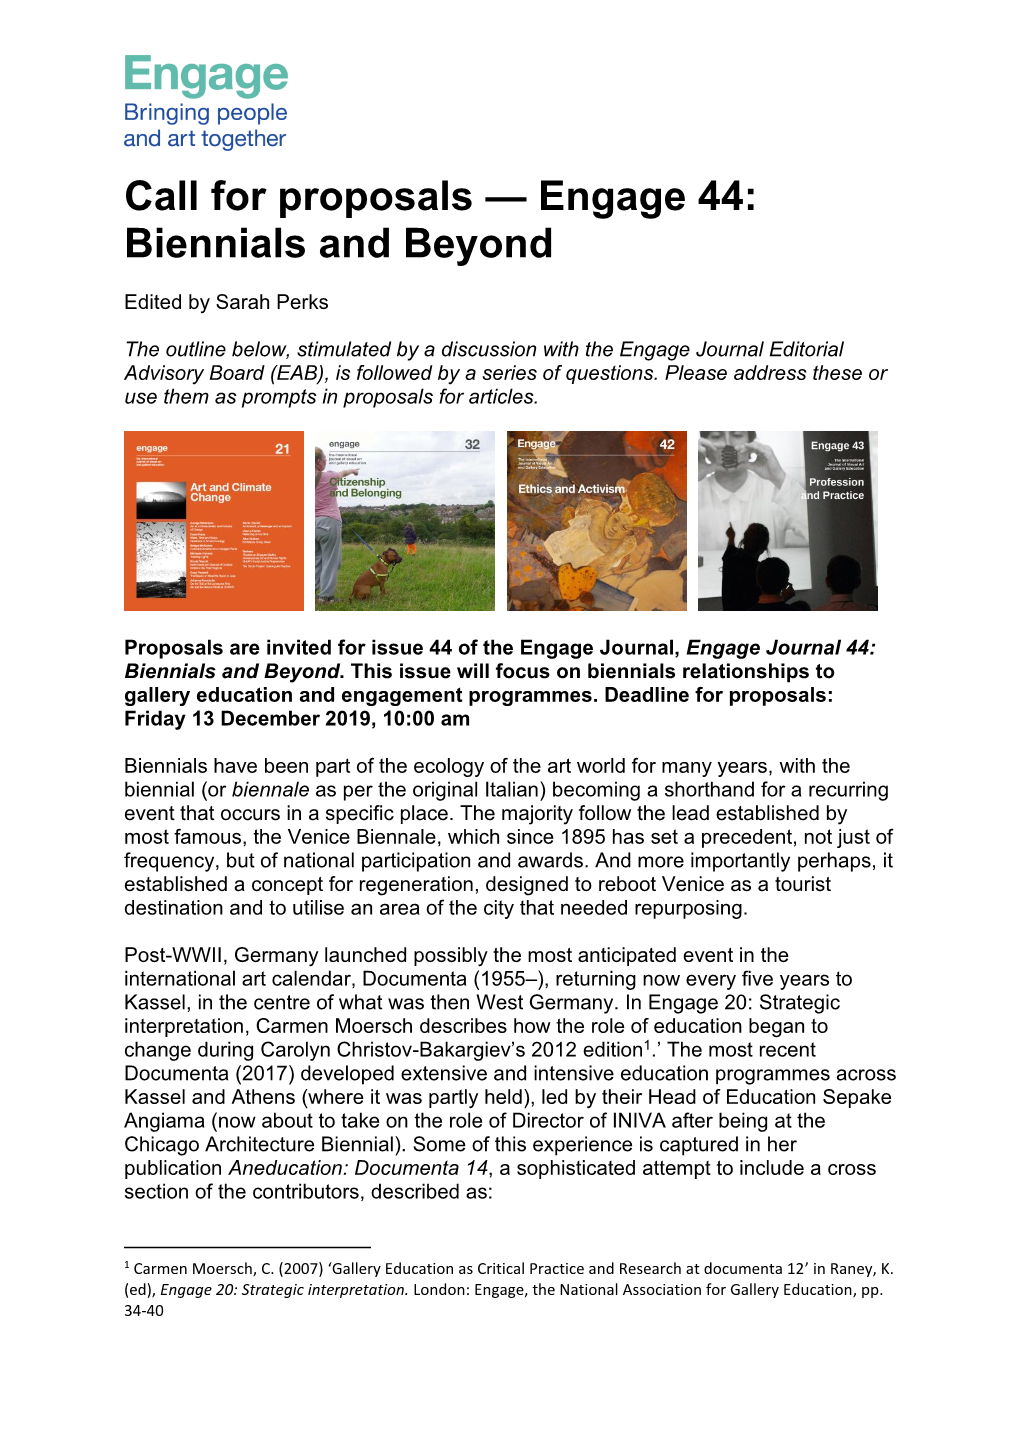 Call for Proposals — Engage 44: Biennials and Beyond